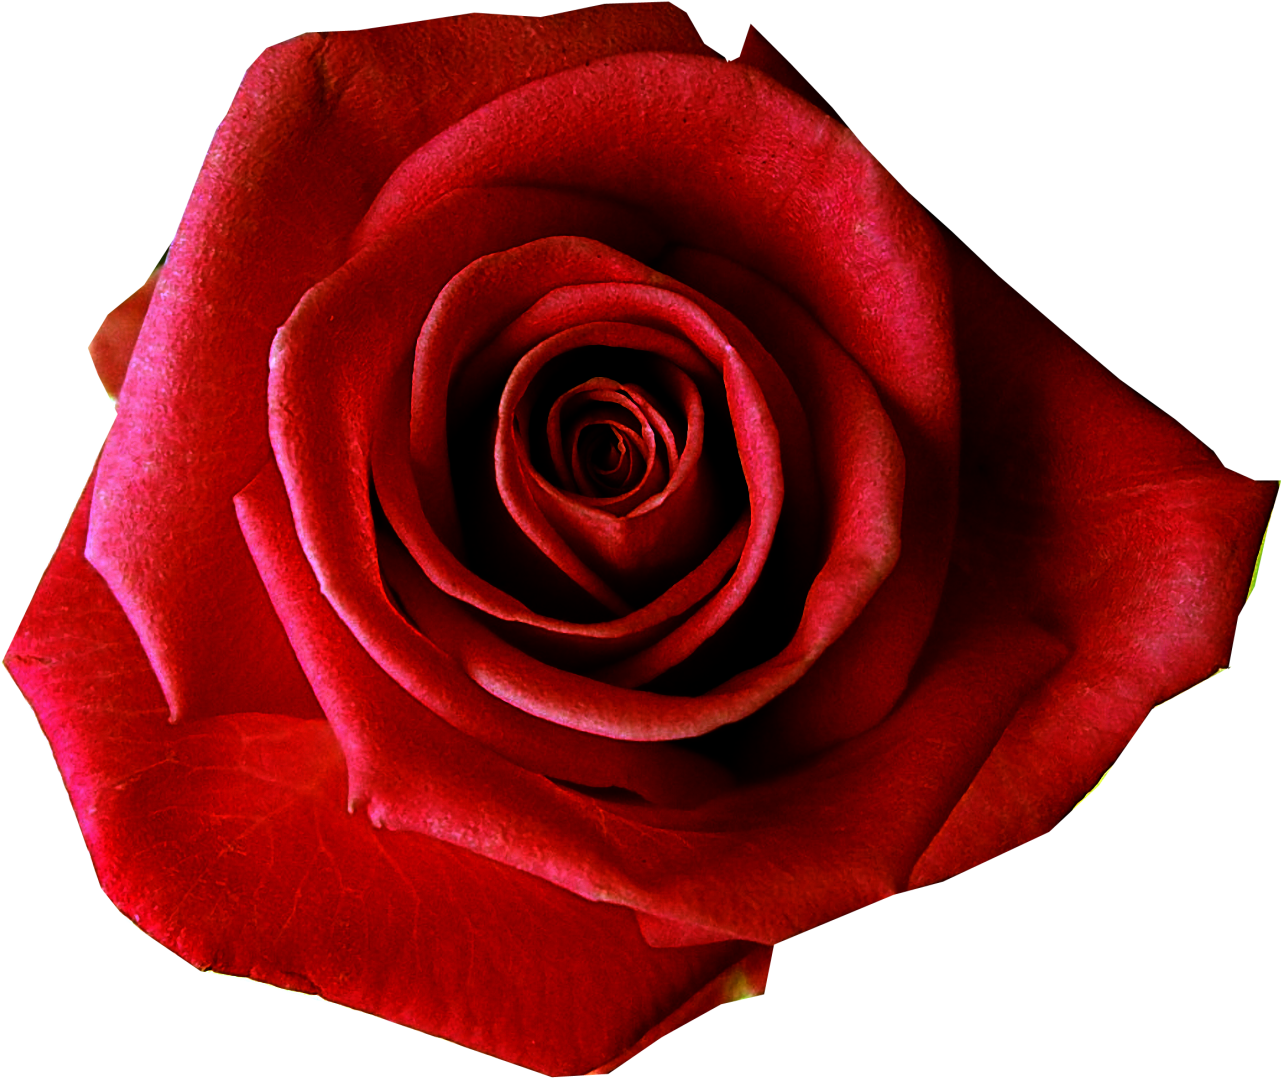 Roses Images Free - Red Rose No Background (1280x1085)